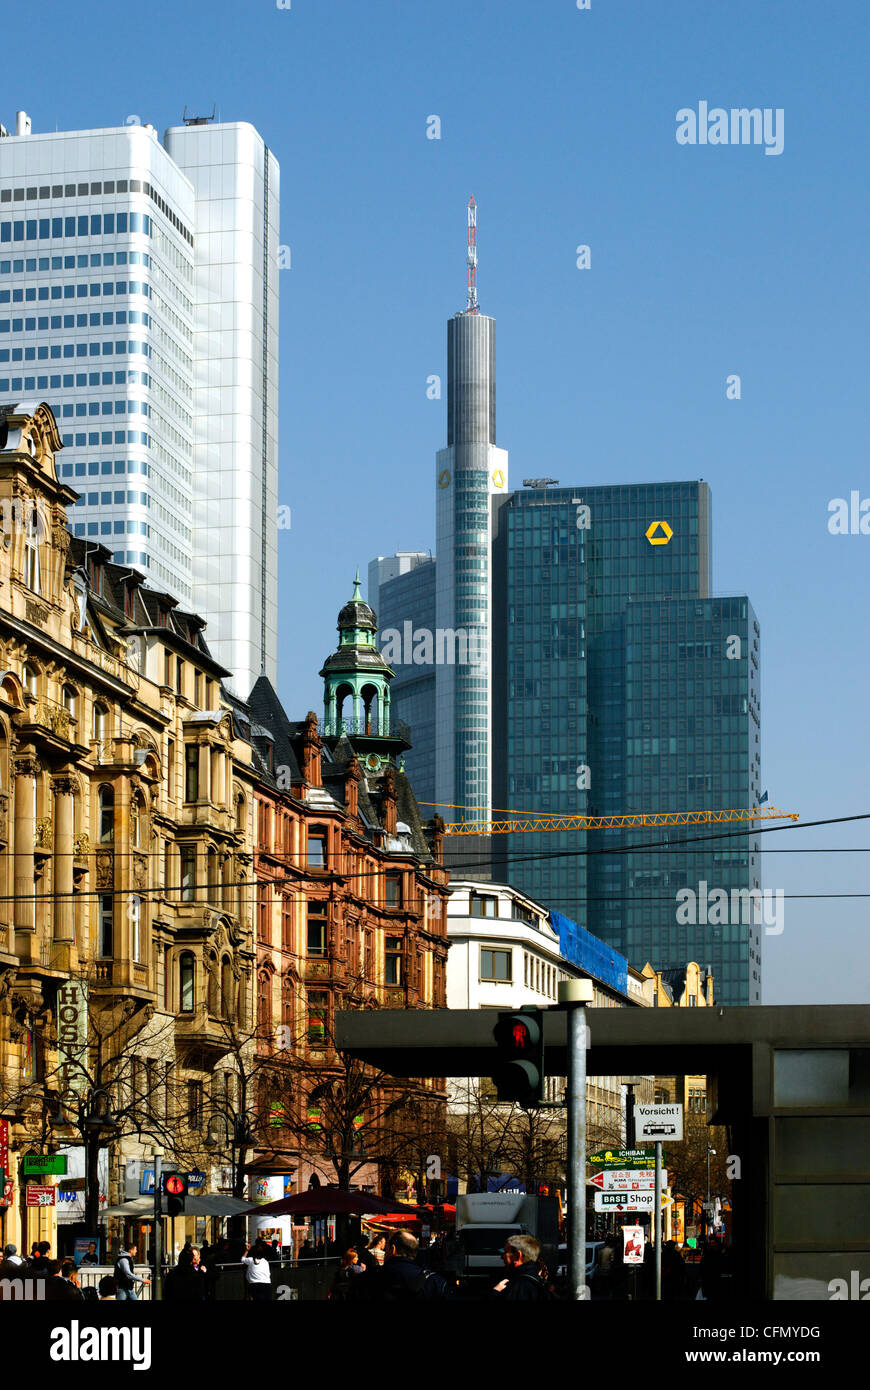 Old and modern architecture in Frankfurt am Main Stock Photo